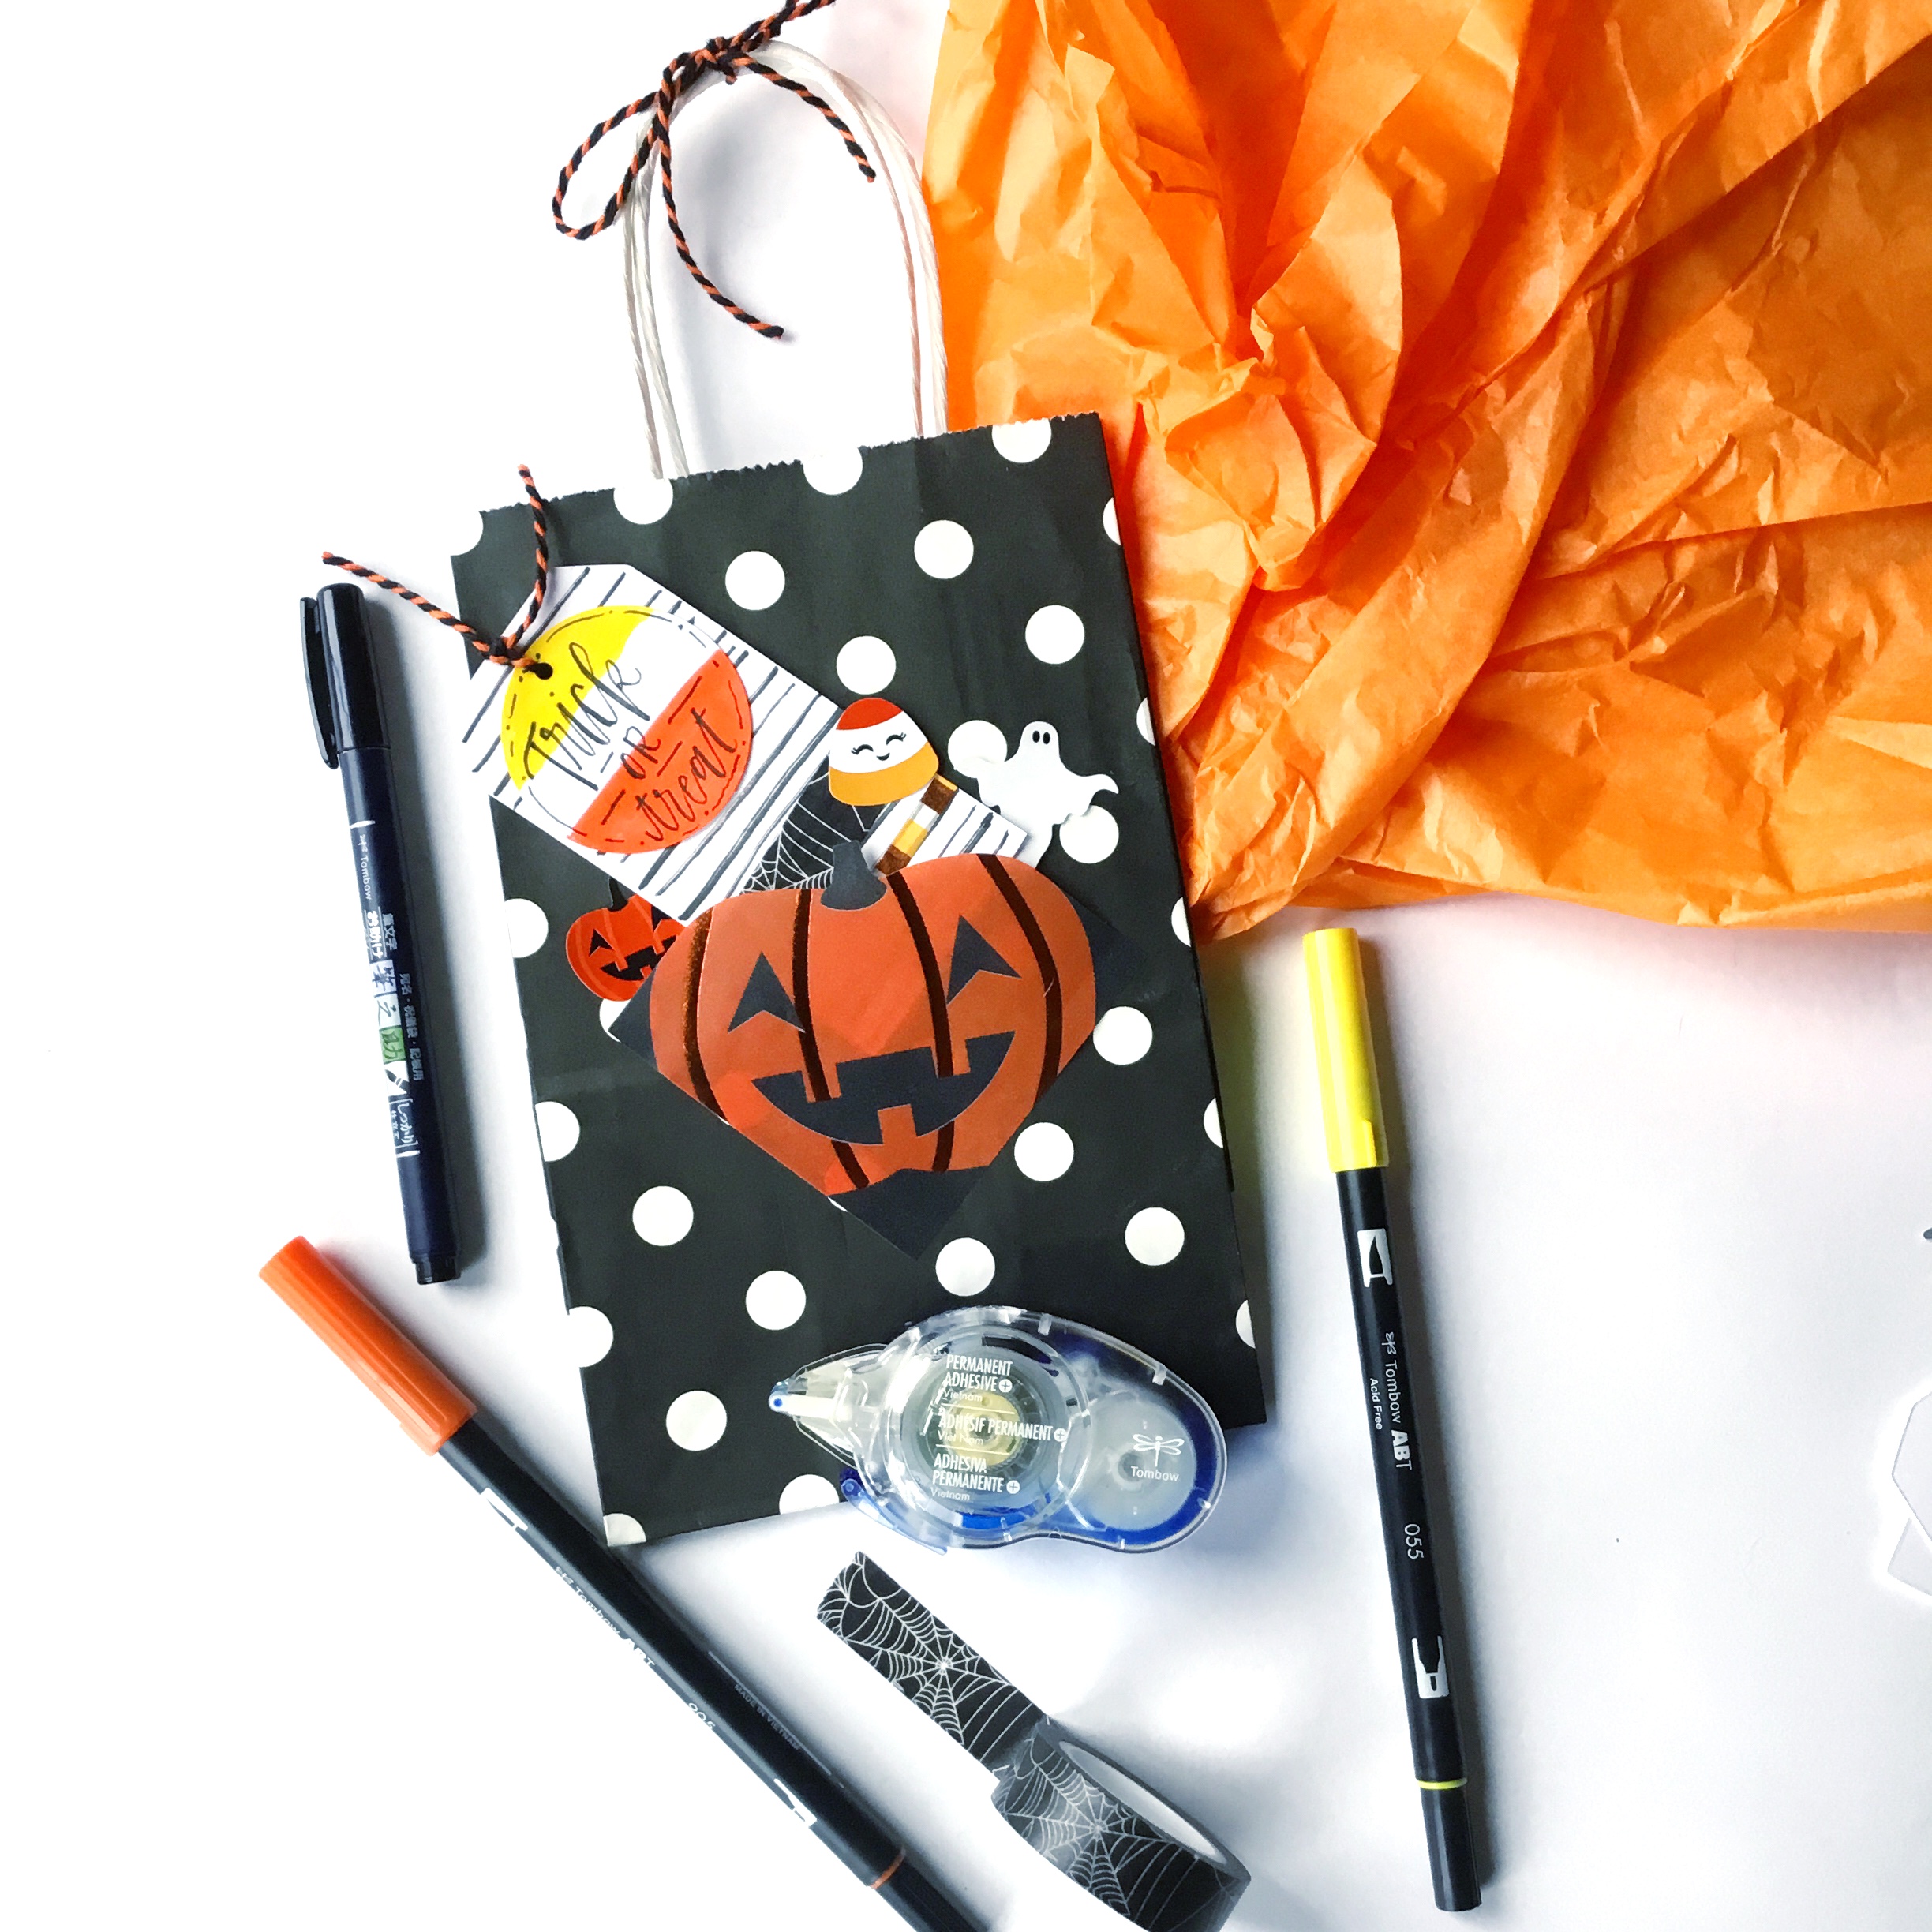 Lauren of Tombow USA Design Team and renmadecalligraphy.com shares 3 fun gift bags and tags using products fromTombow USA and Paper House Productions. Check out more tips and tricks on Lauren's Instagram @renmadecalligraphy.